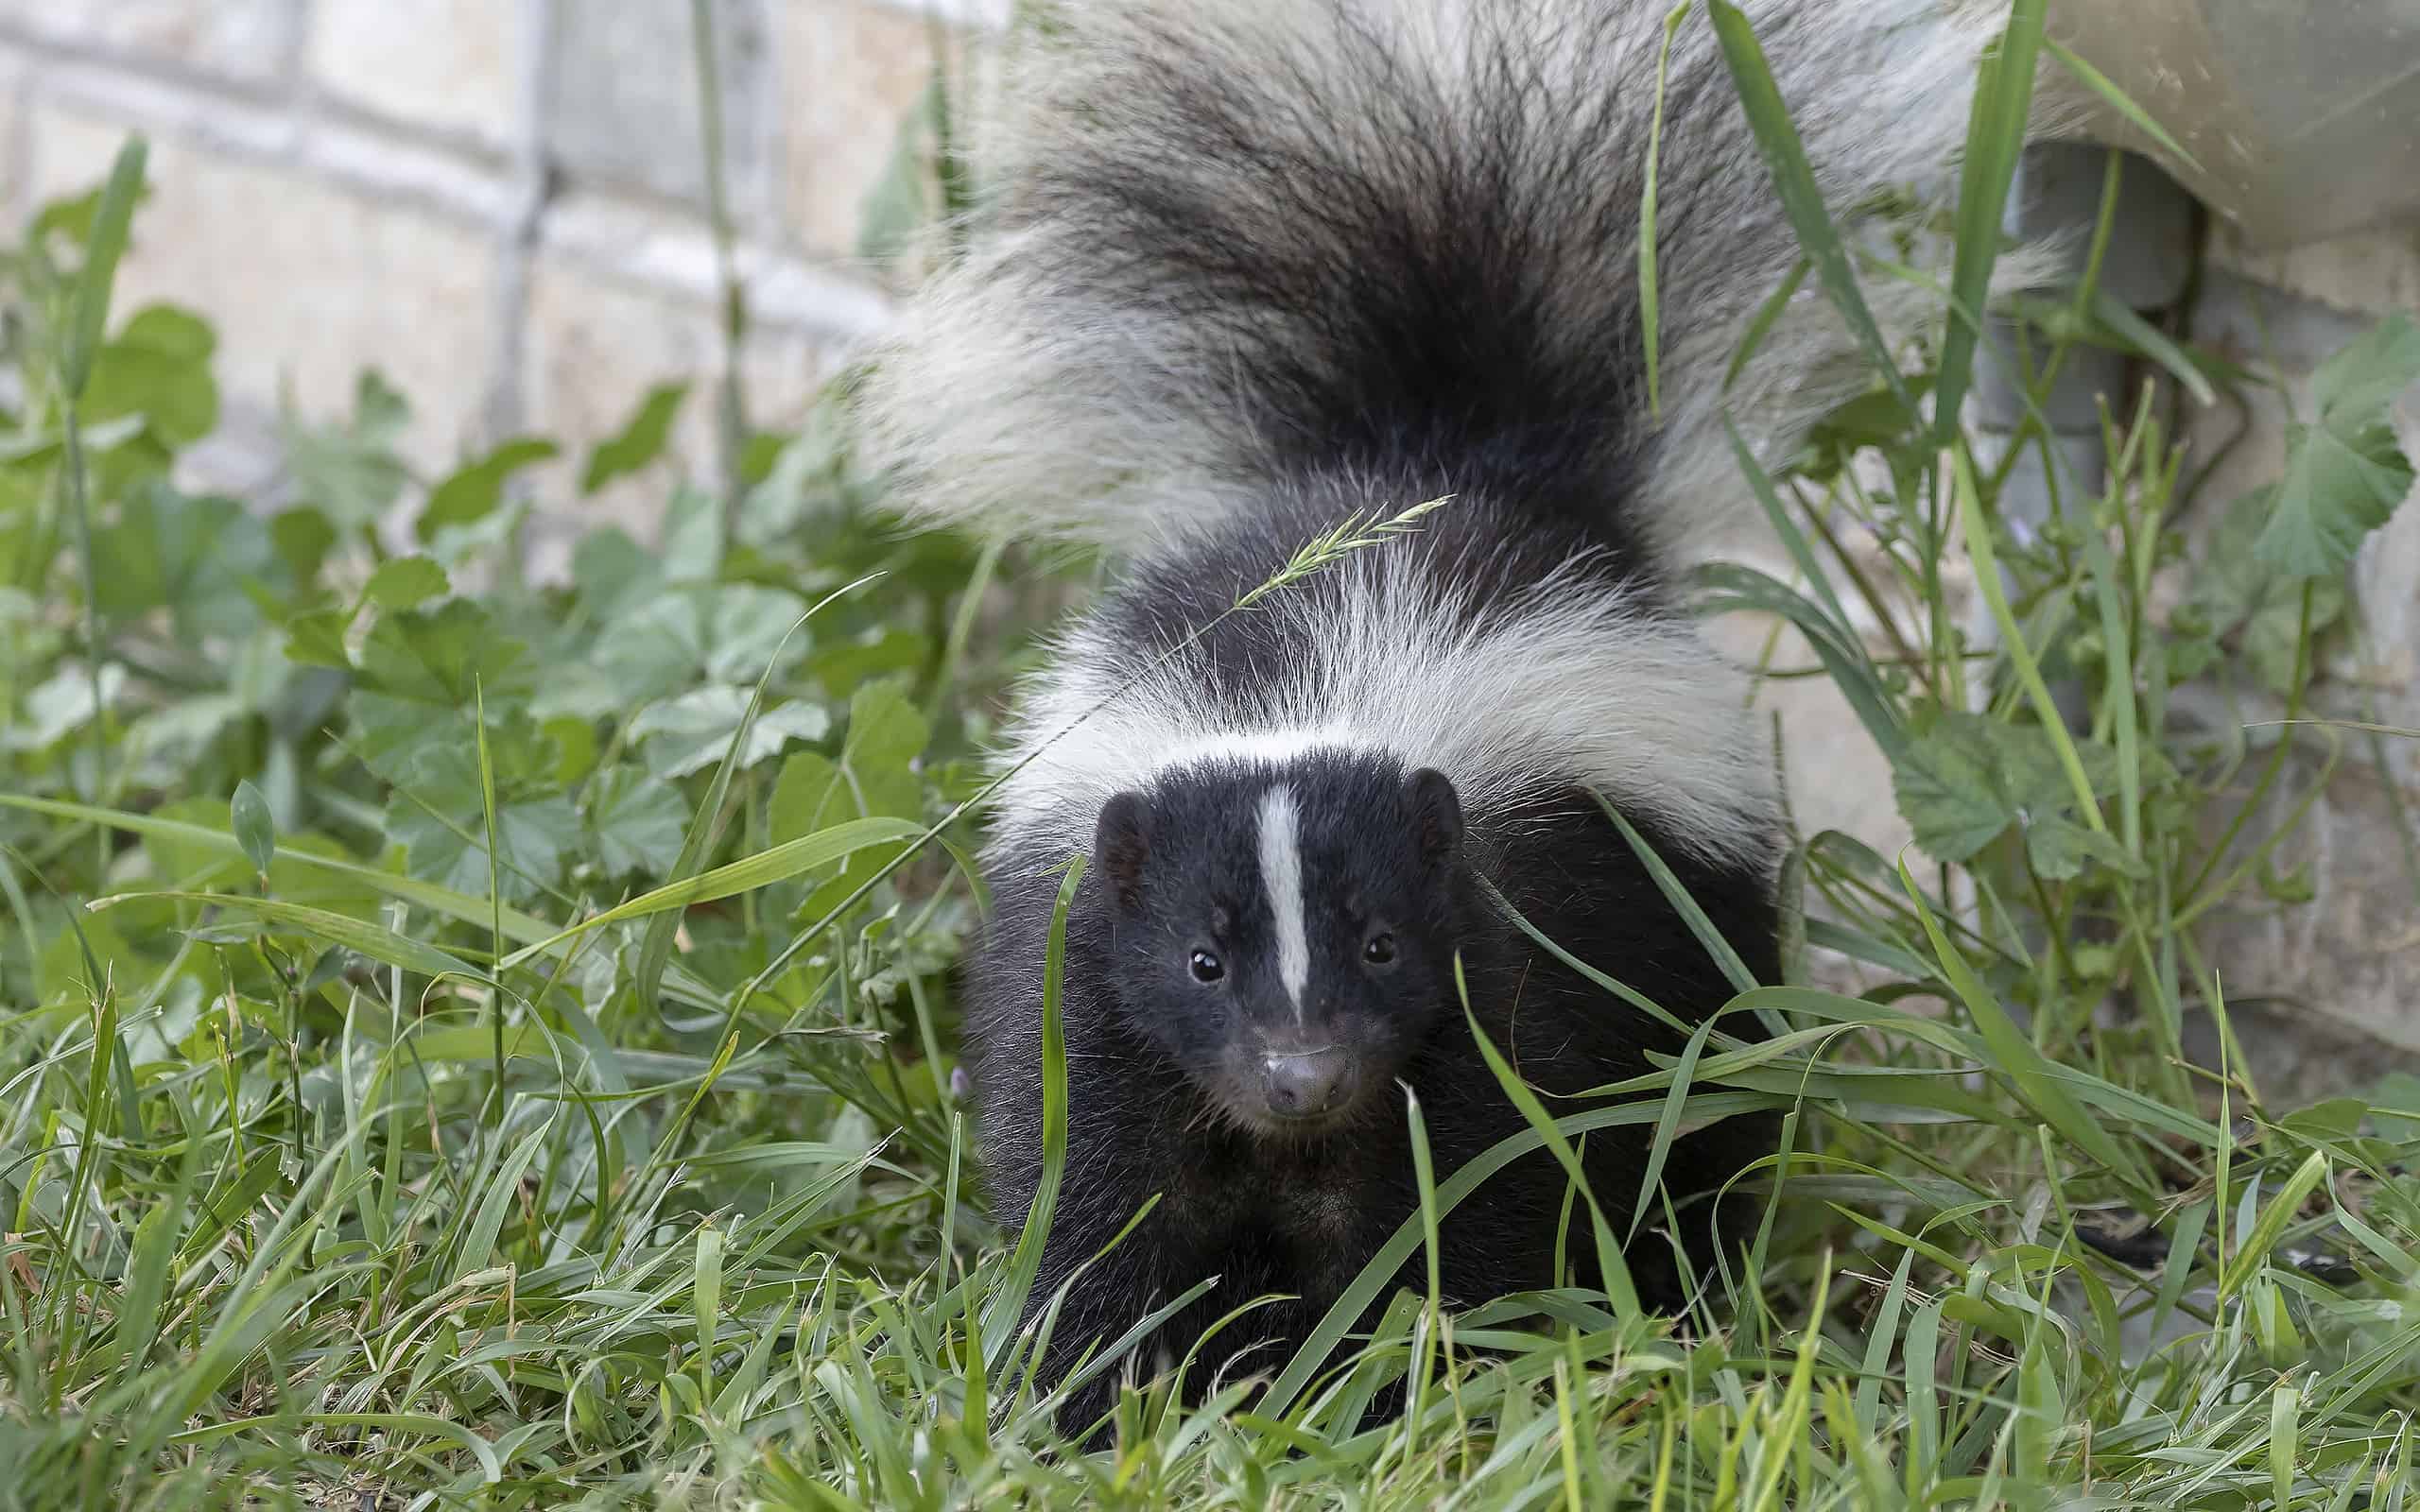 Young striped skunk (Mephitis mephitis) near the human dwelling